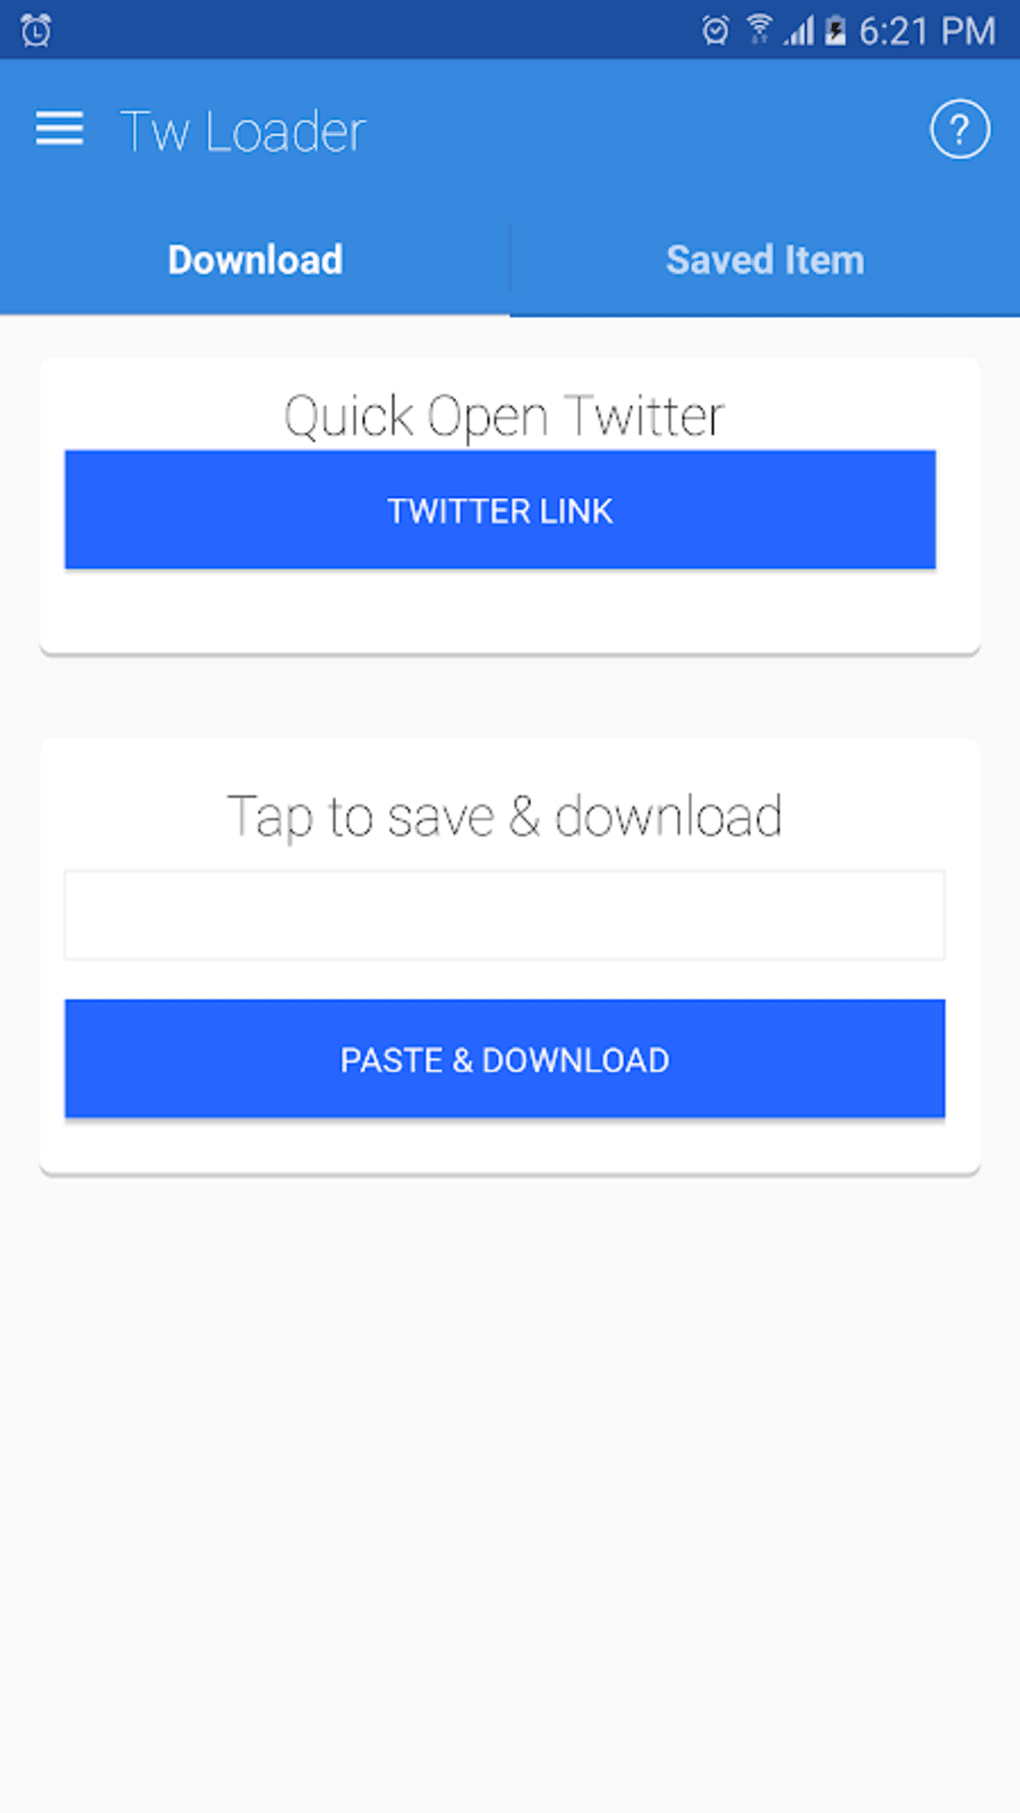 Video downloader for Twitter for Android - Free App Download